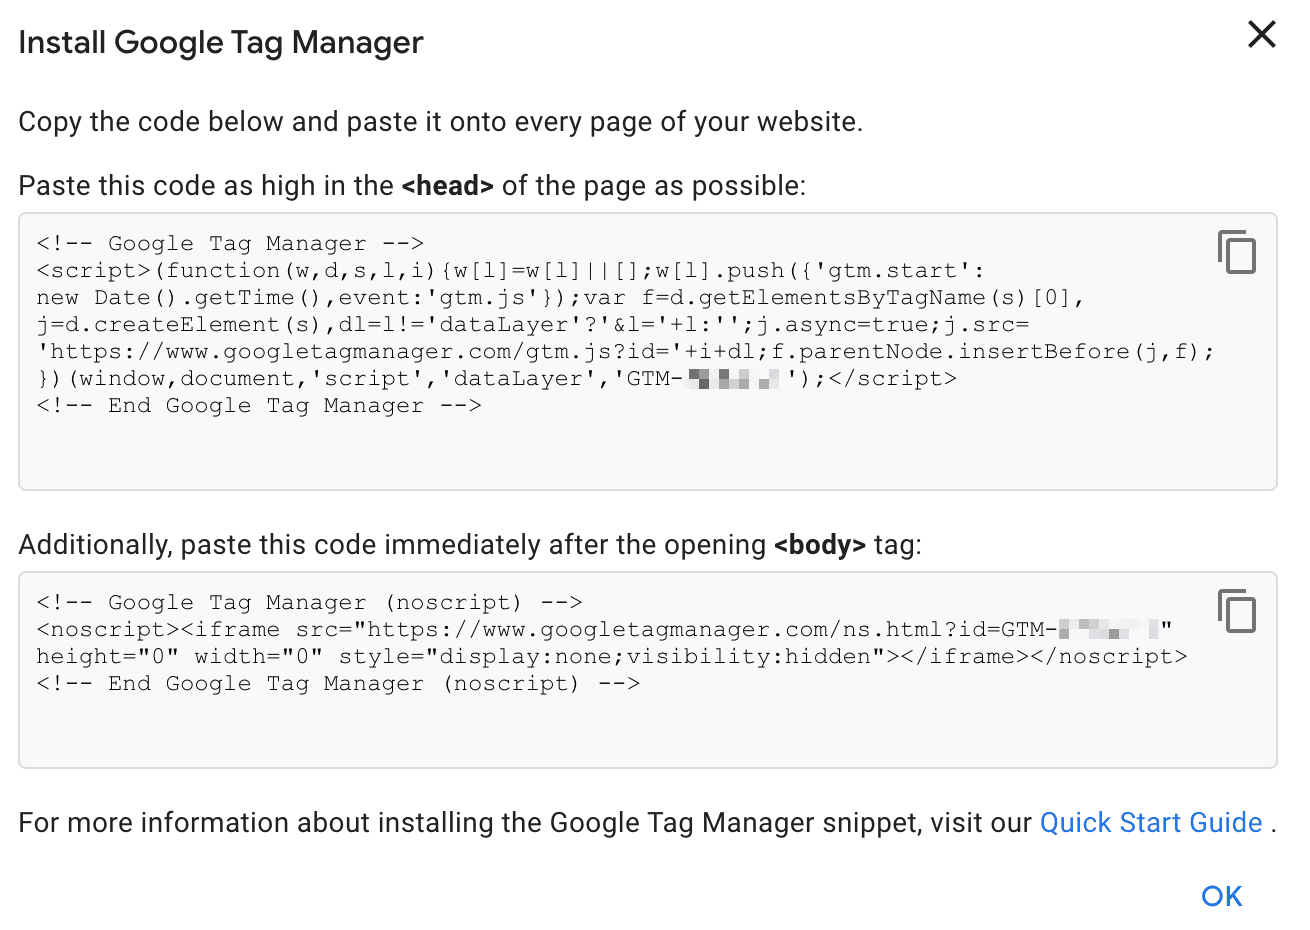 installing google tag manager